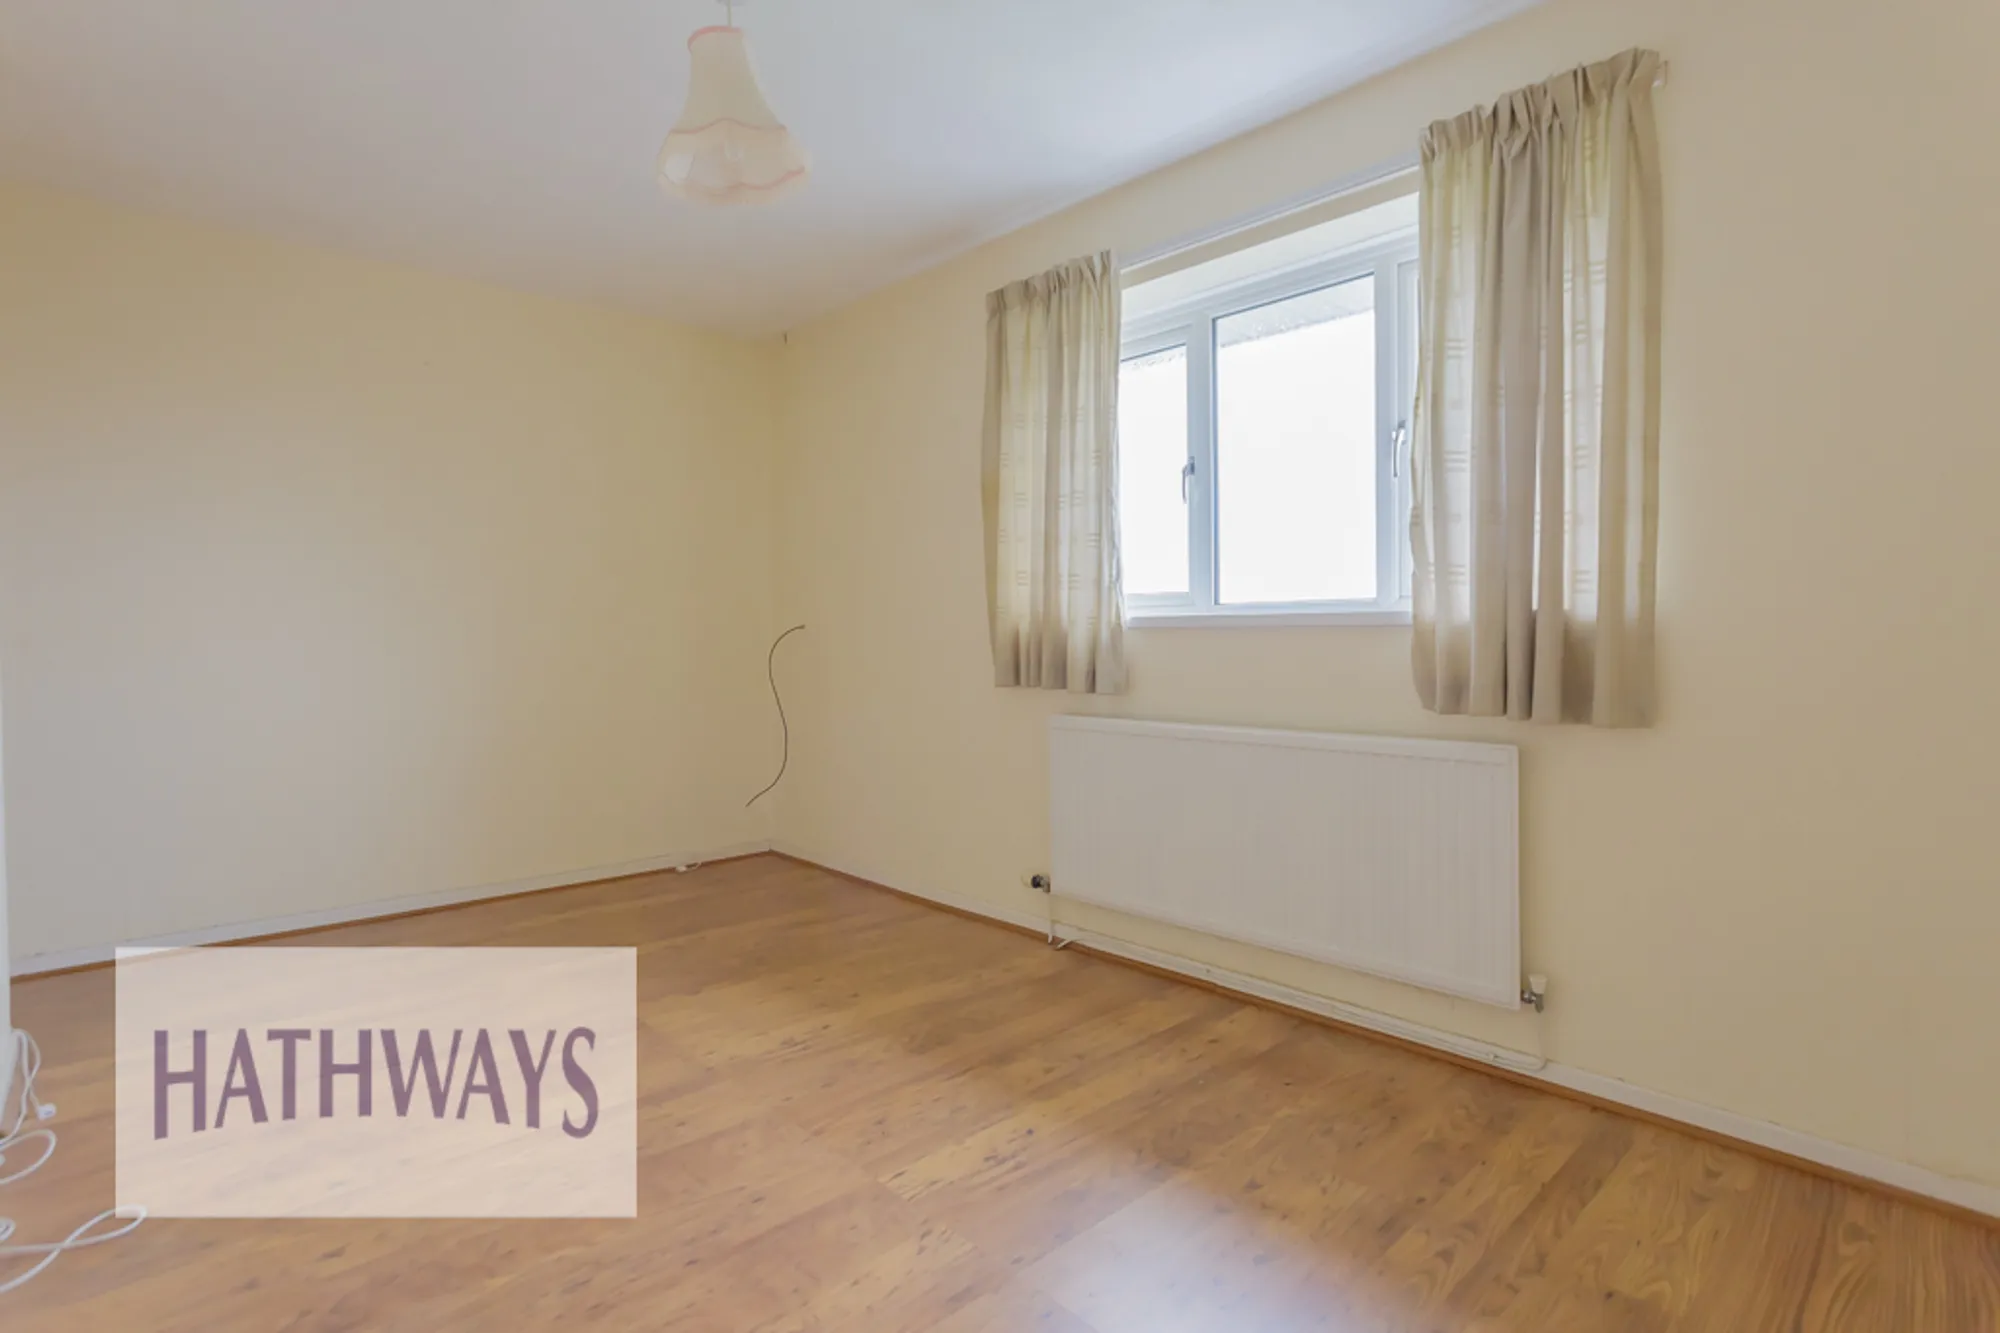 3 bed mid-terraced house for sale in Brynhyfryd, Cwmbran  - Property Image 17